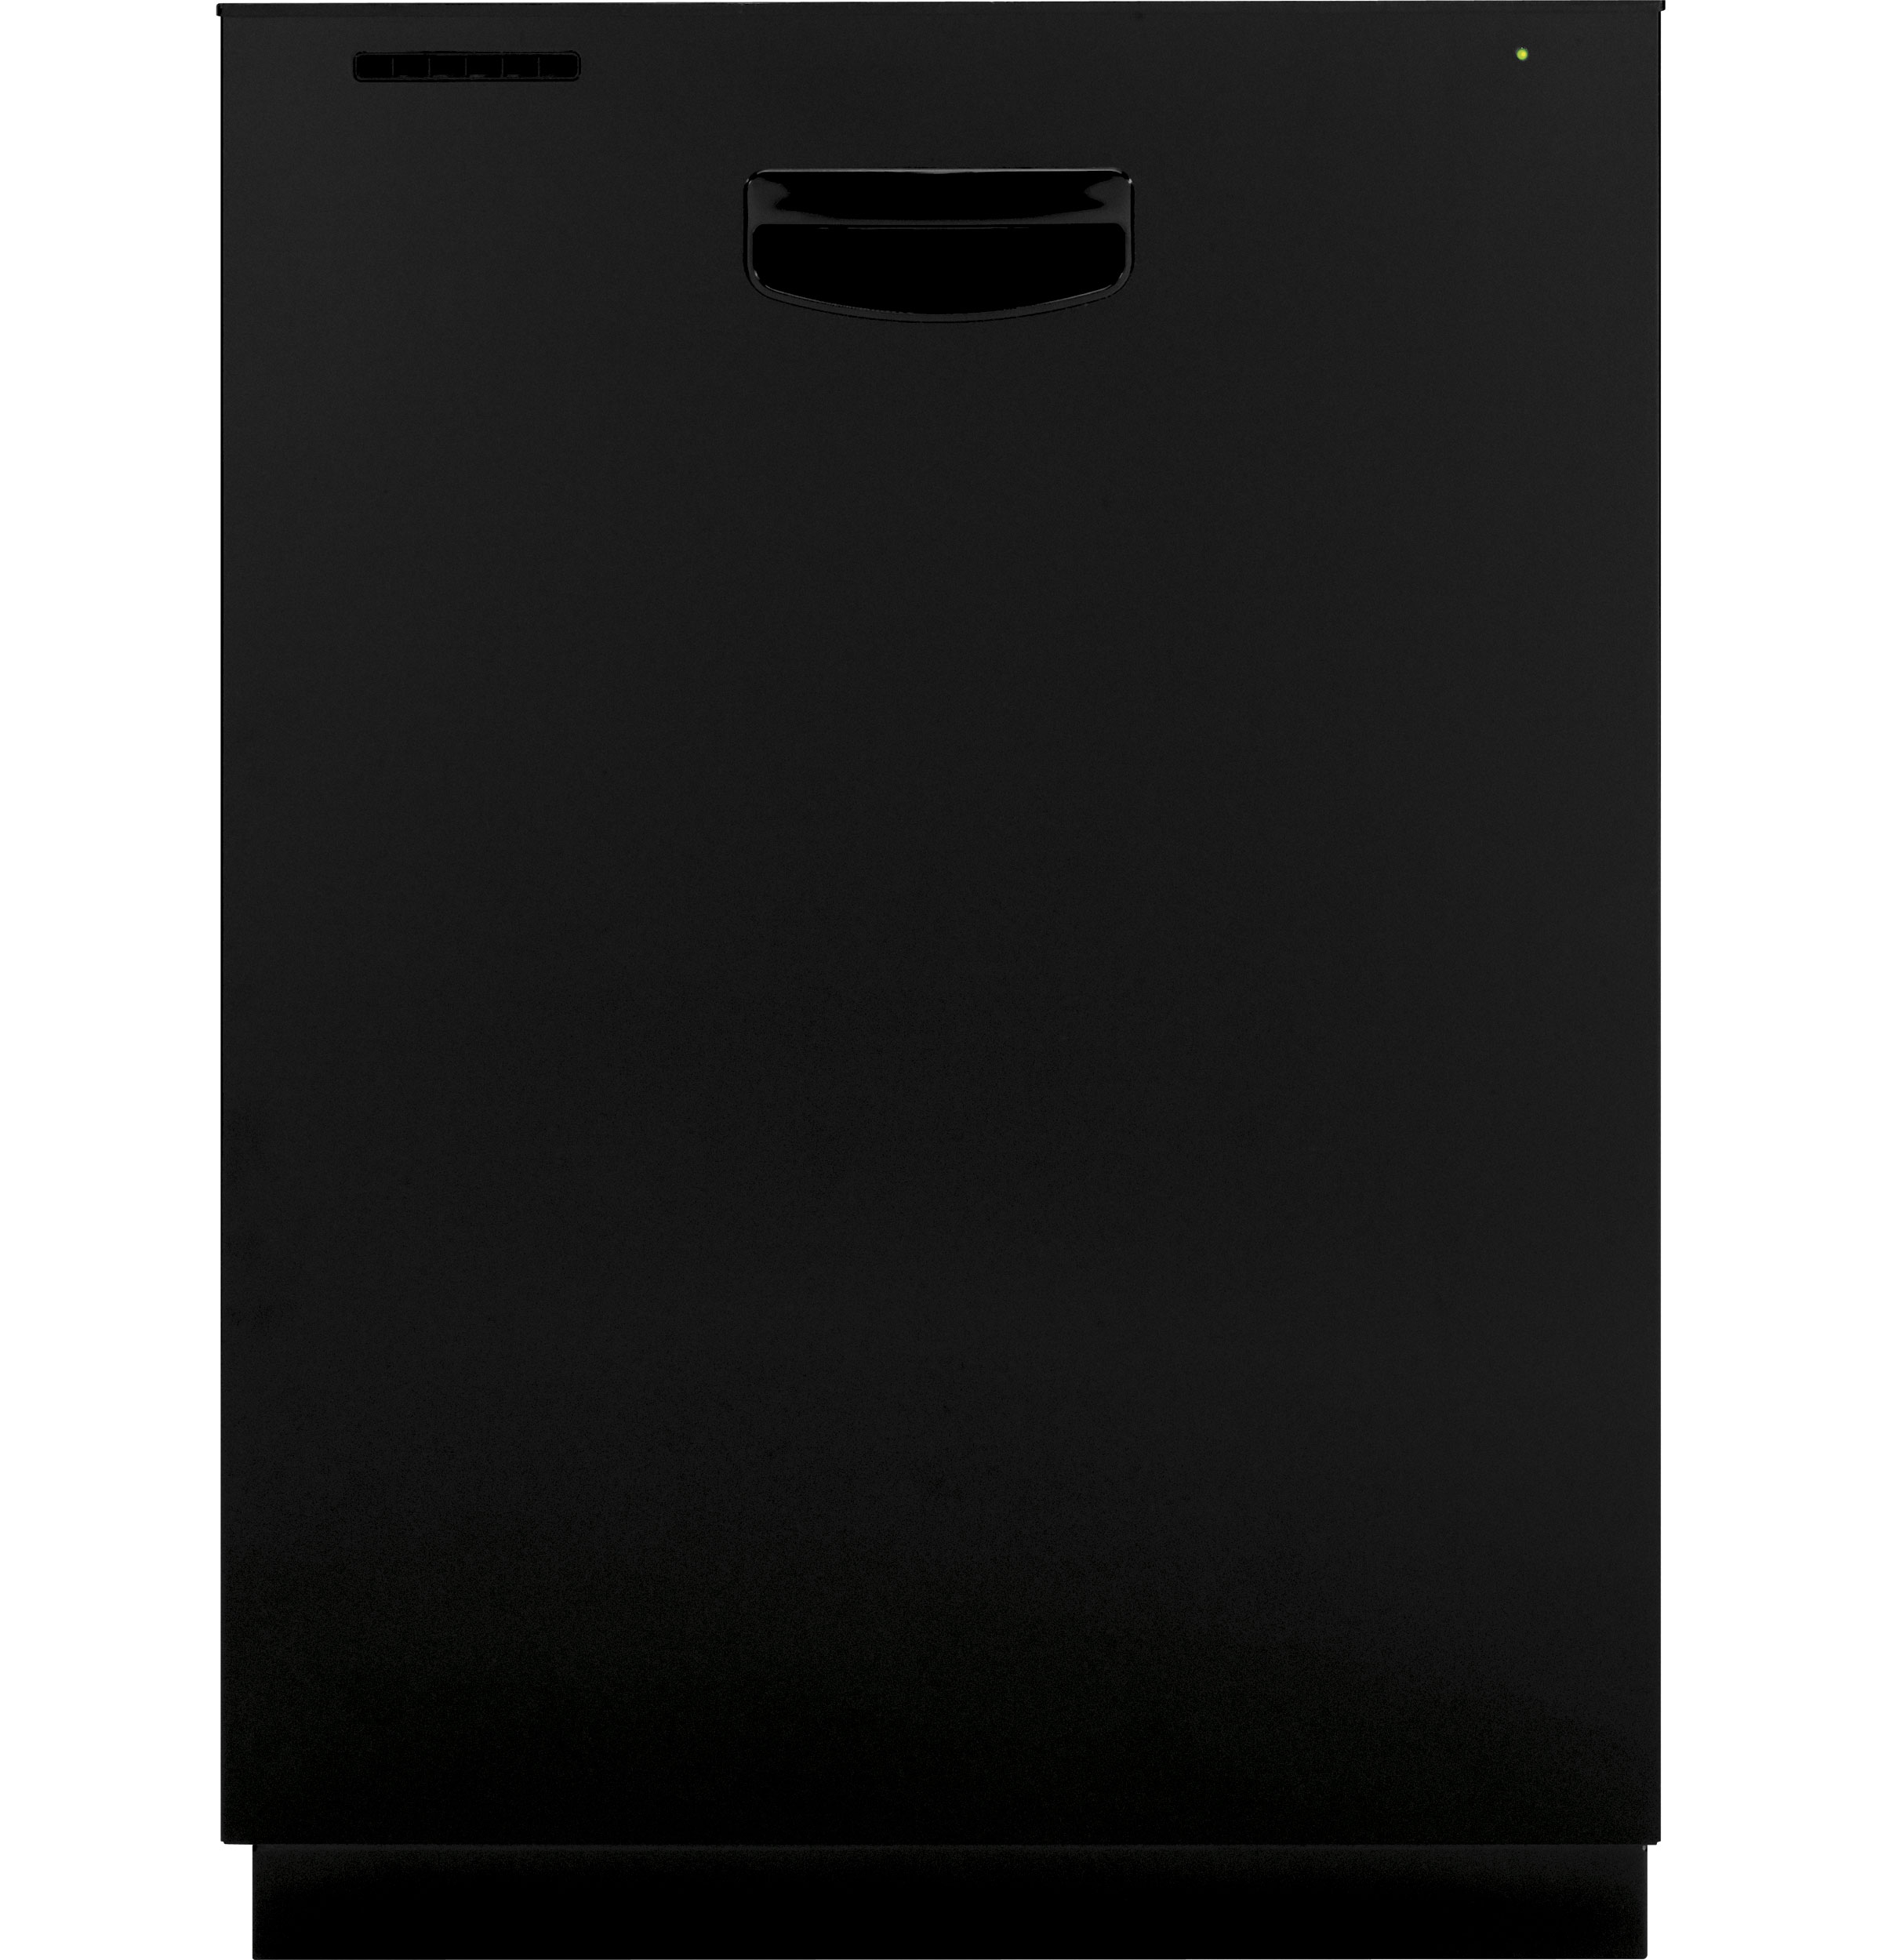 GE® Tall Tub Built-In Dishwasher with hidden controls and recessed handle